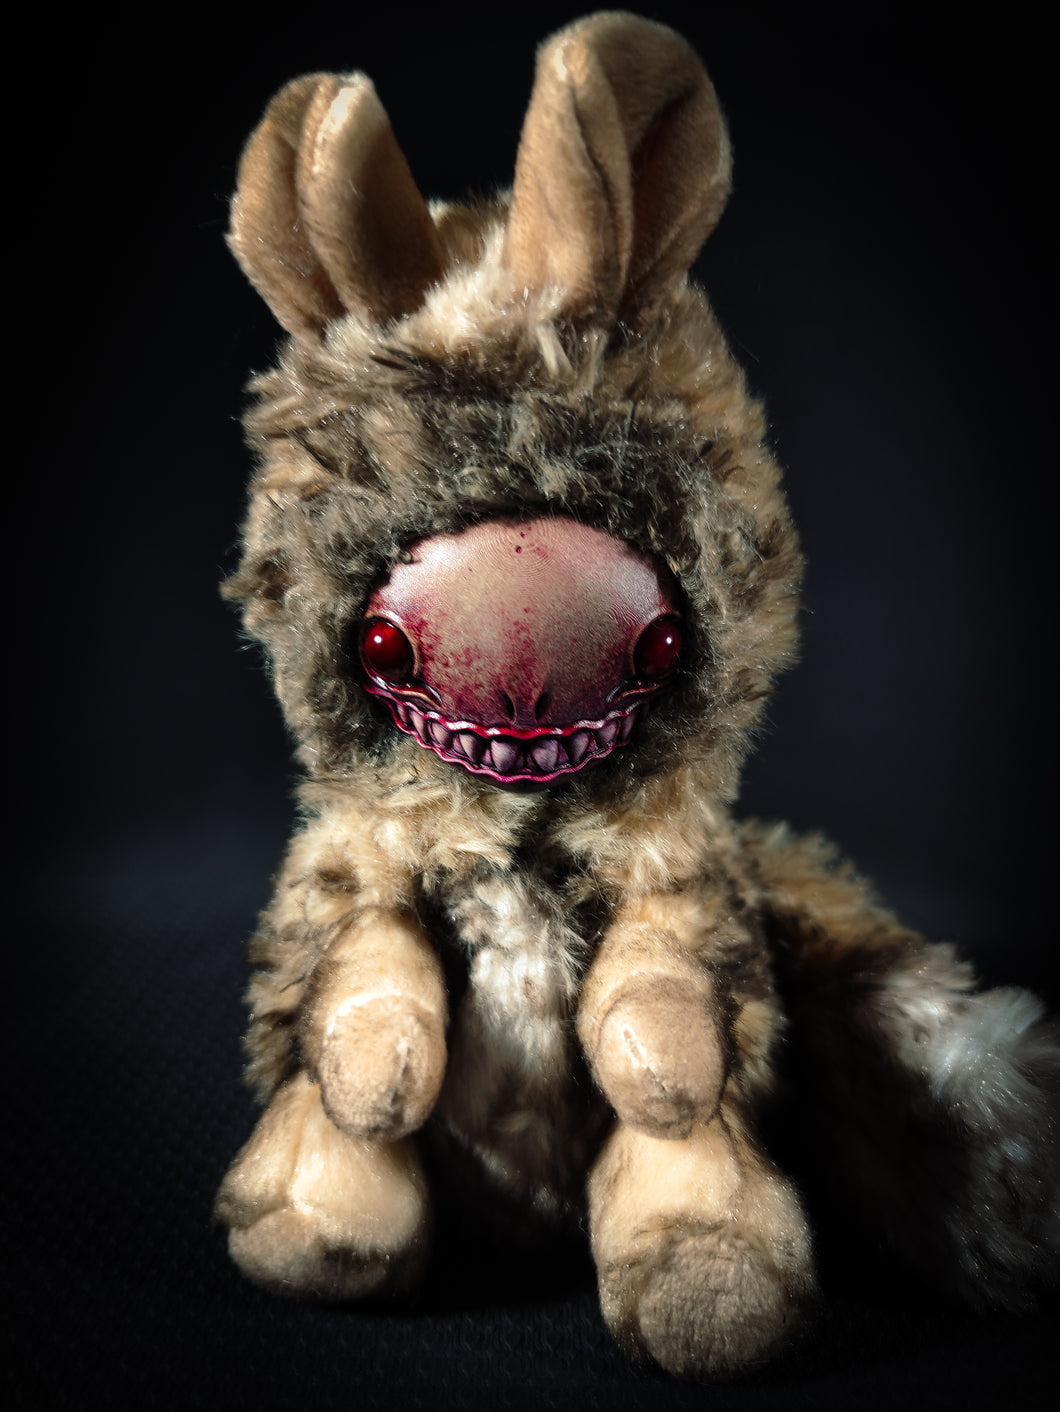 FRIEND Blood Stain Flavour - Cryptid Art Doll Plush Toy